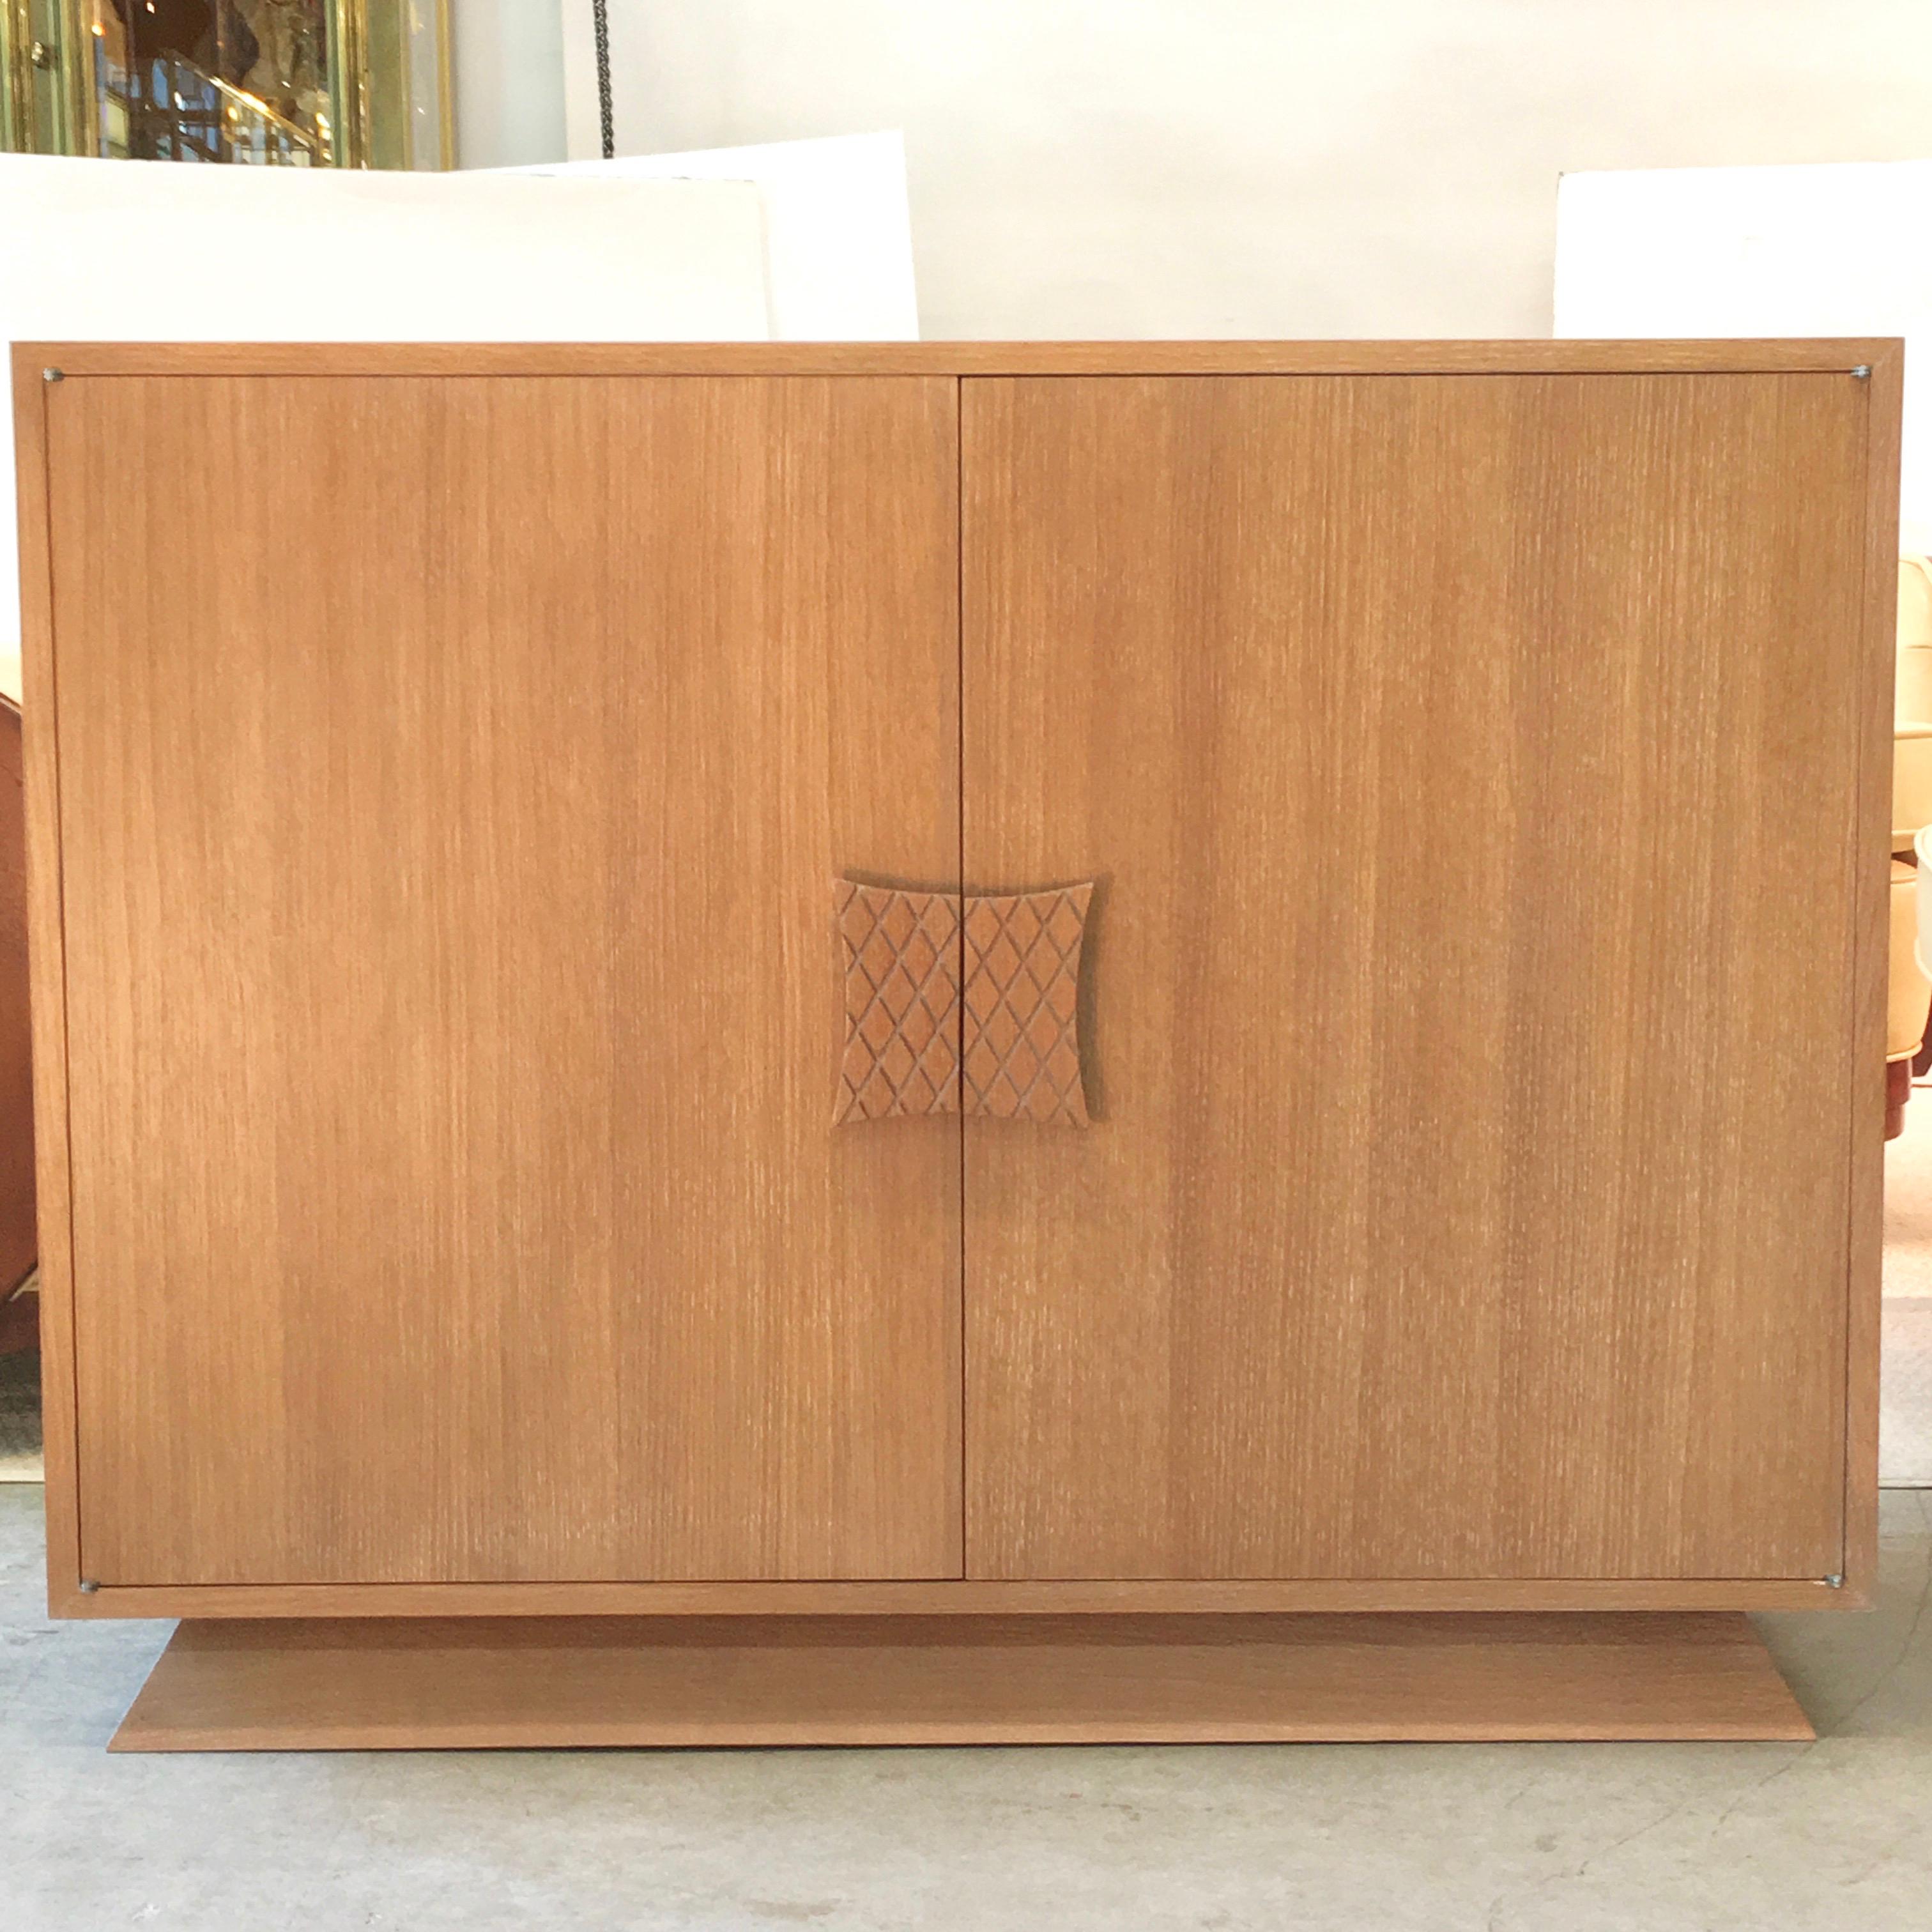 
Presenting BG Galleries' exclusive re-edition of a custom design by Ernst Schwadron and executed in the workshop of Vladimir Kagan's father in 1949.
Two door cabinet of harmonic proportions, constructed of white oak set on a trapezoidal plinth base